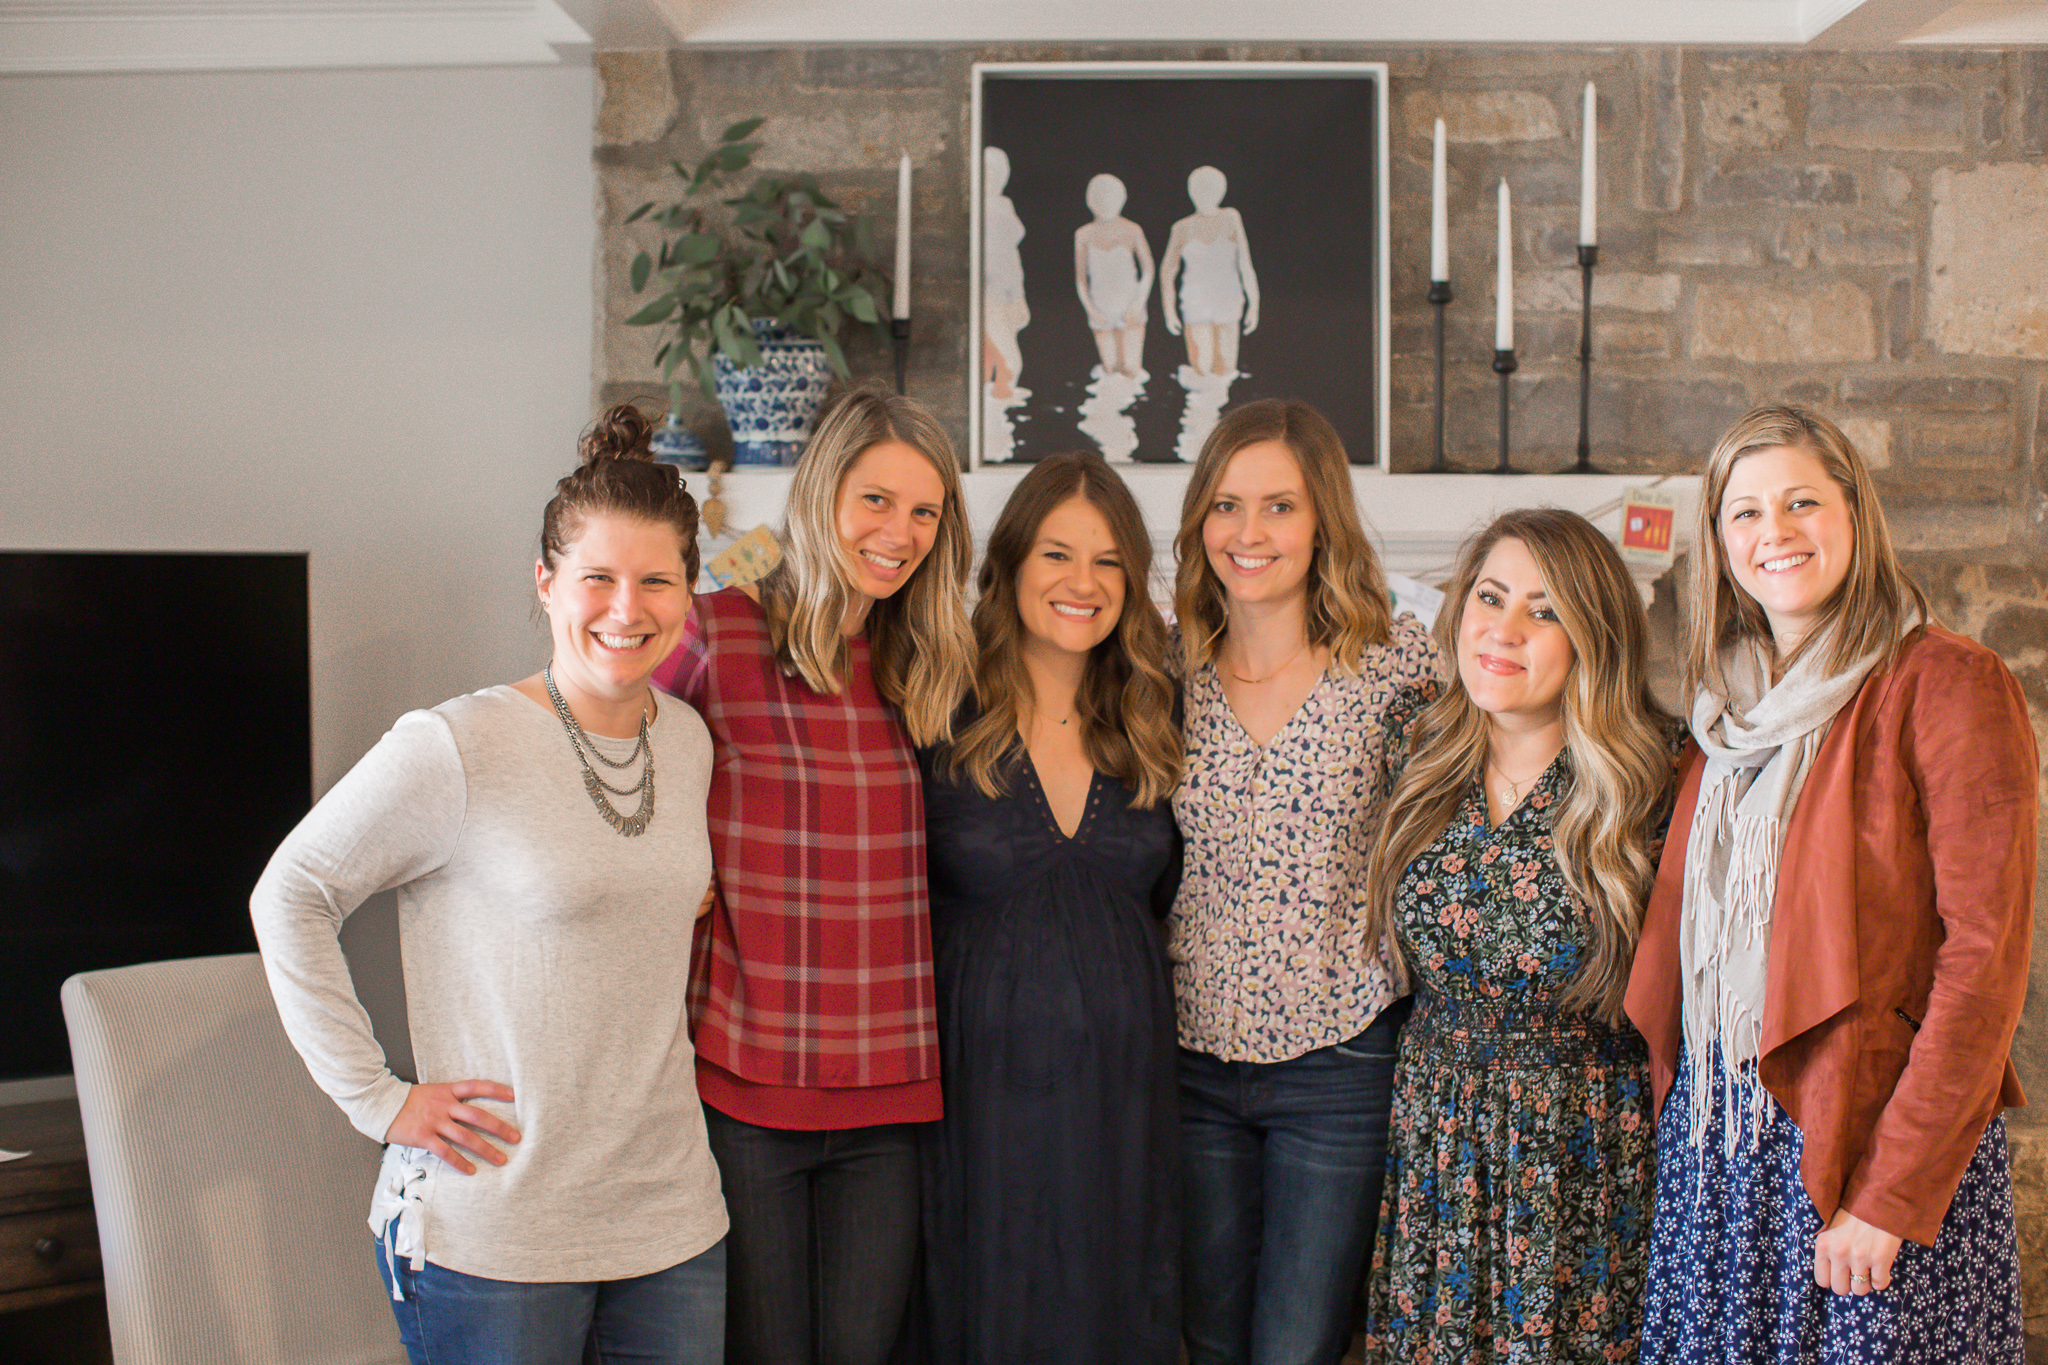  Story Book Baby Shower Ideas by popular North Carolina life and style blog, Coffee Beans and Bobby Pins: image of a group of women standing together.